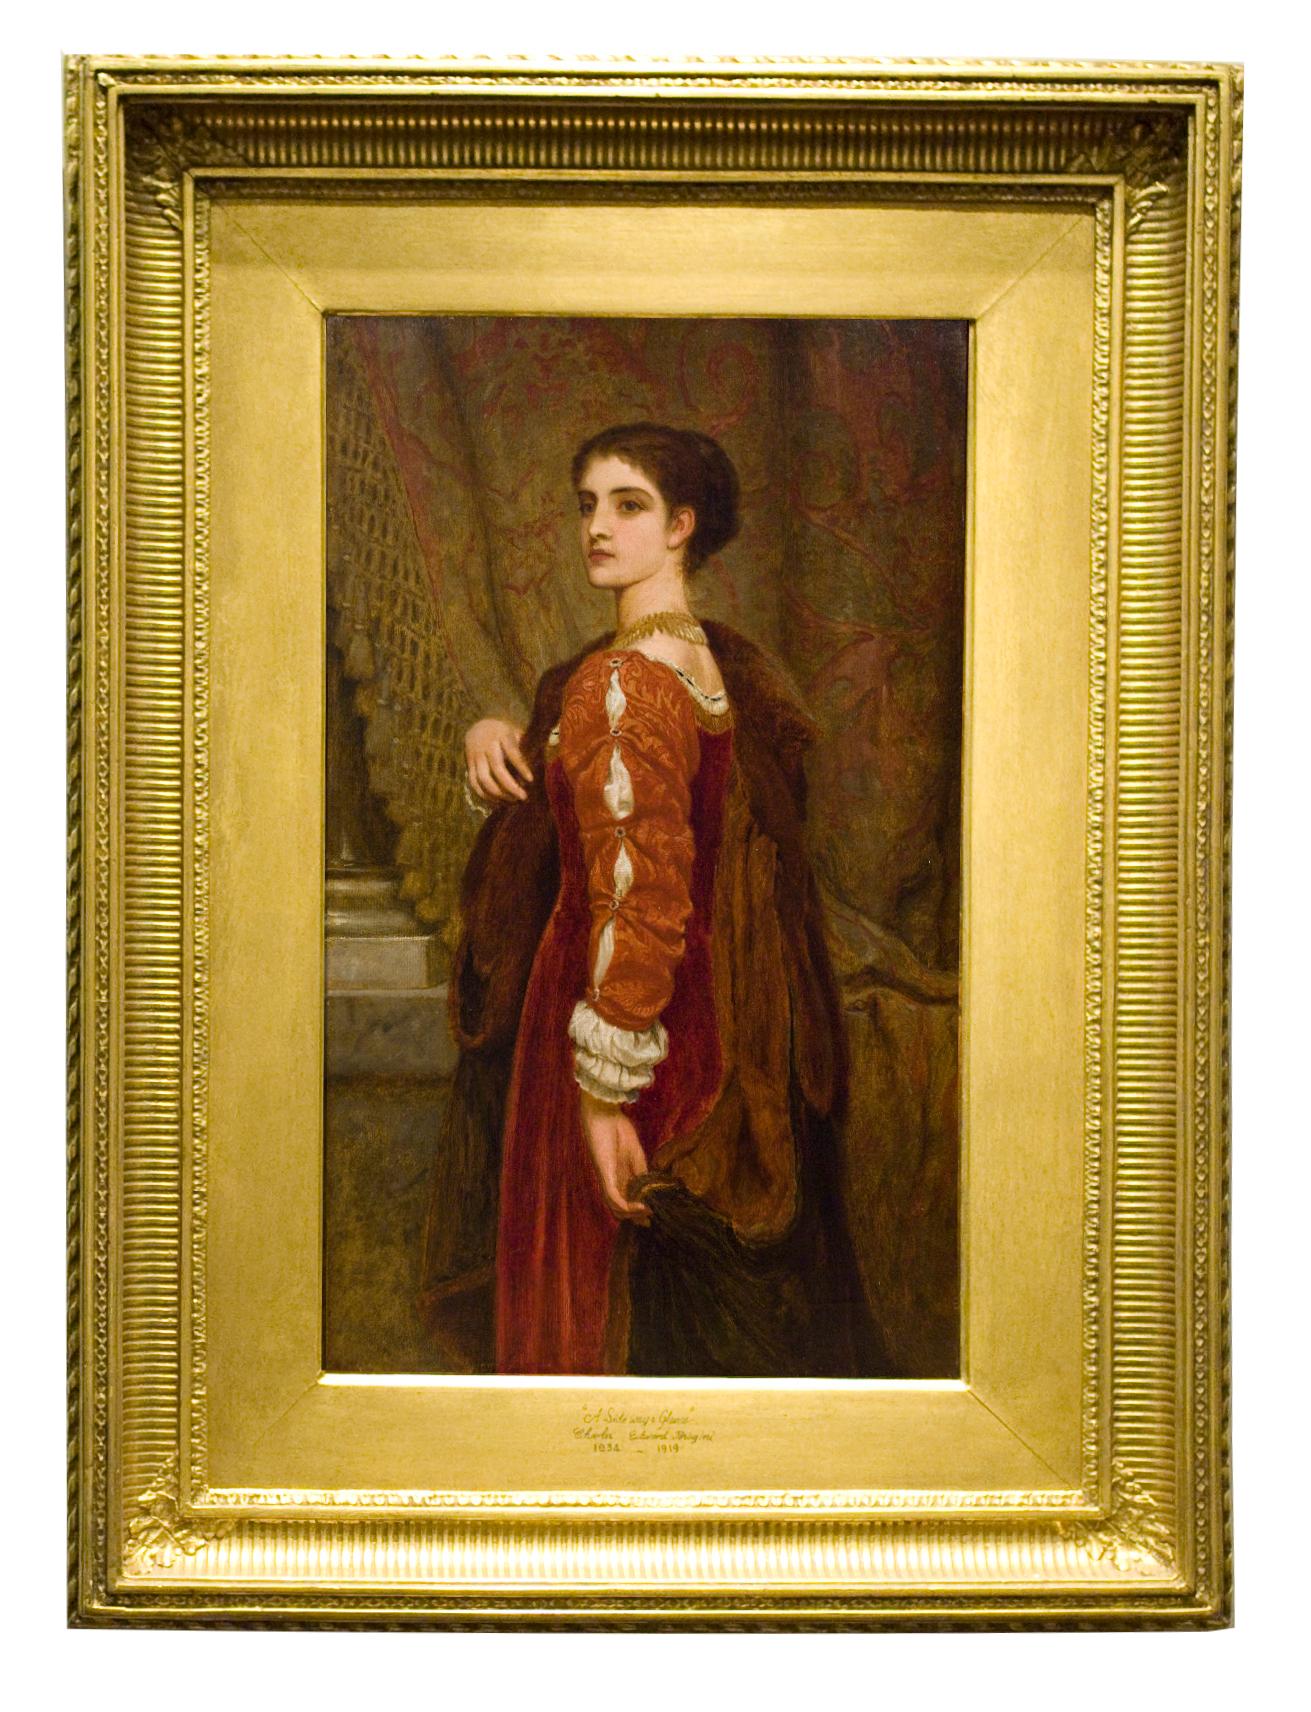 Charles Edward Perugini Portrait Painting - Pre-Raphaelite Portrait of Woman in Red by Perugini, titled "A Sideways Glance"